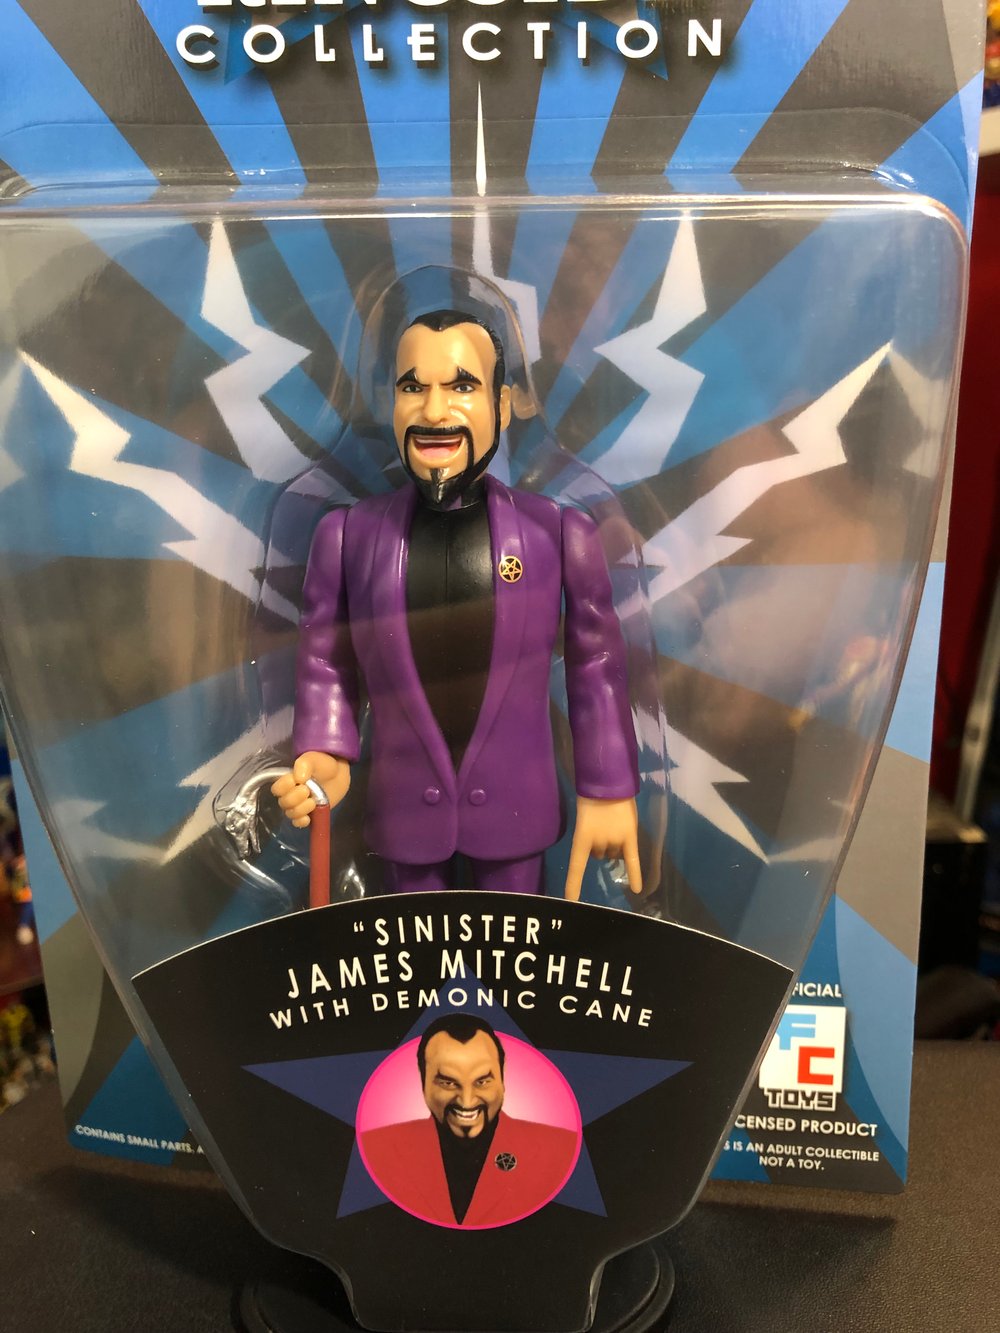 **IN STOCK** LIMITED TO 150 PURPLE JAMES MITCHELL Bone Crushing Wrestlers Ringside Collection Figure